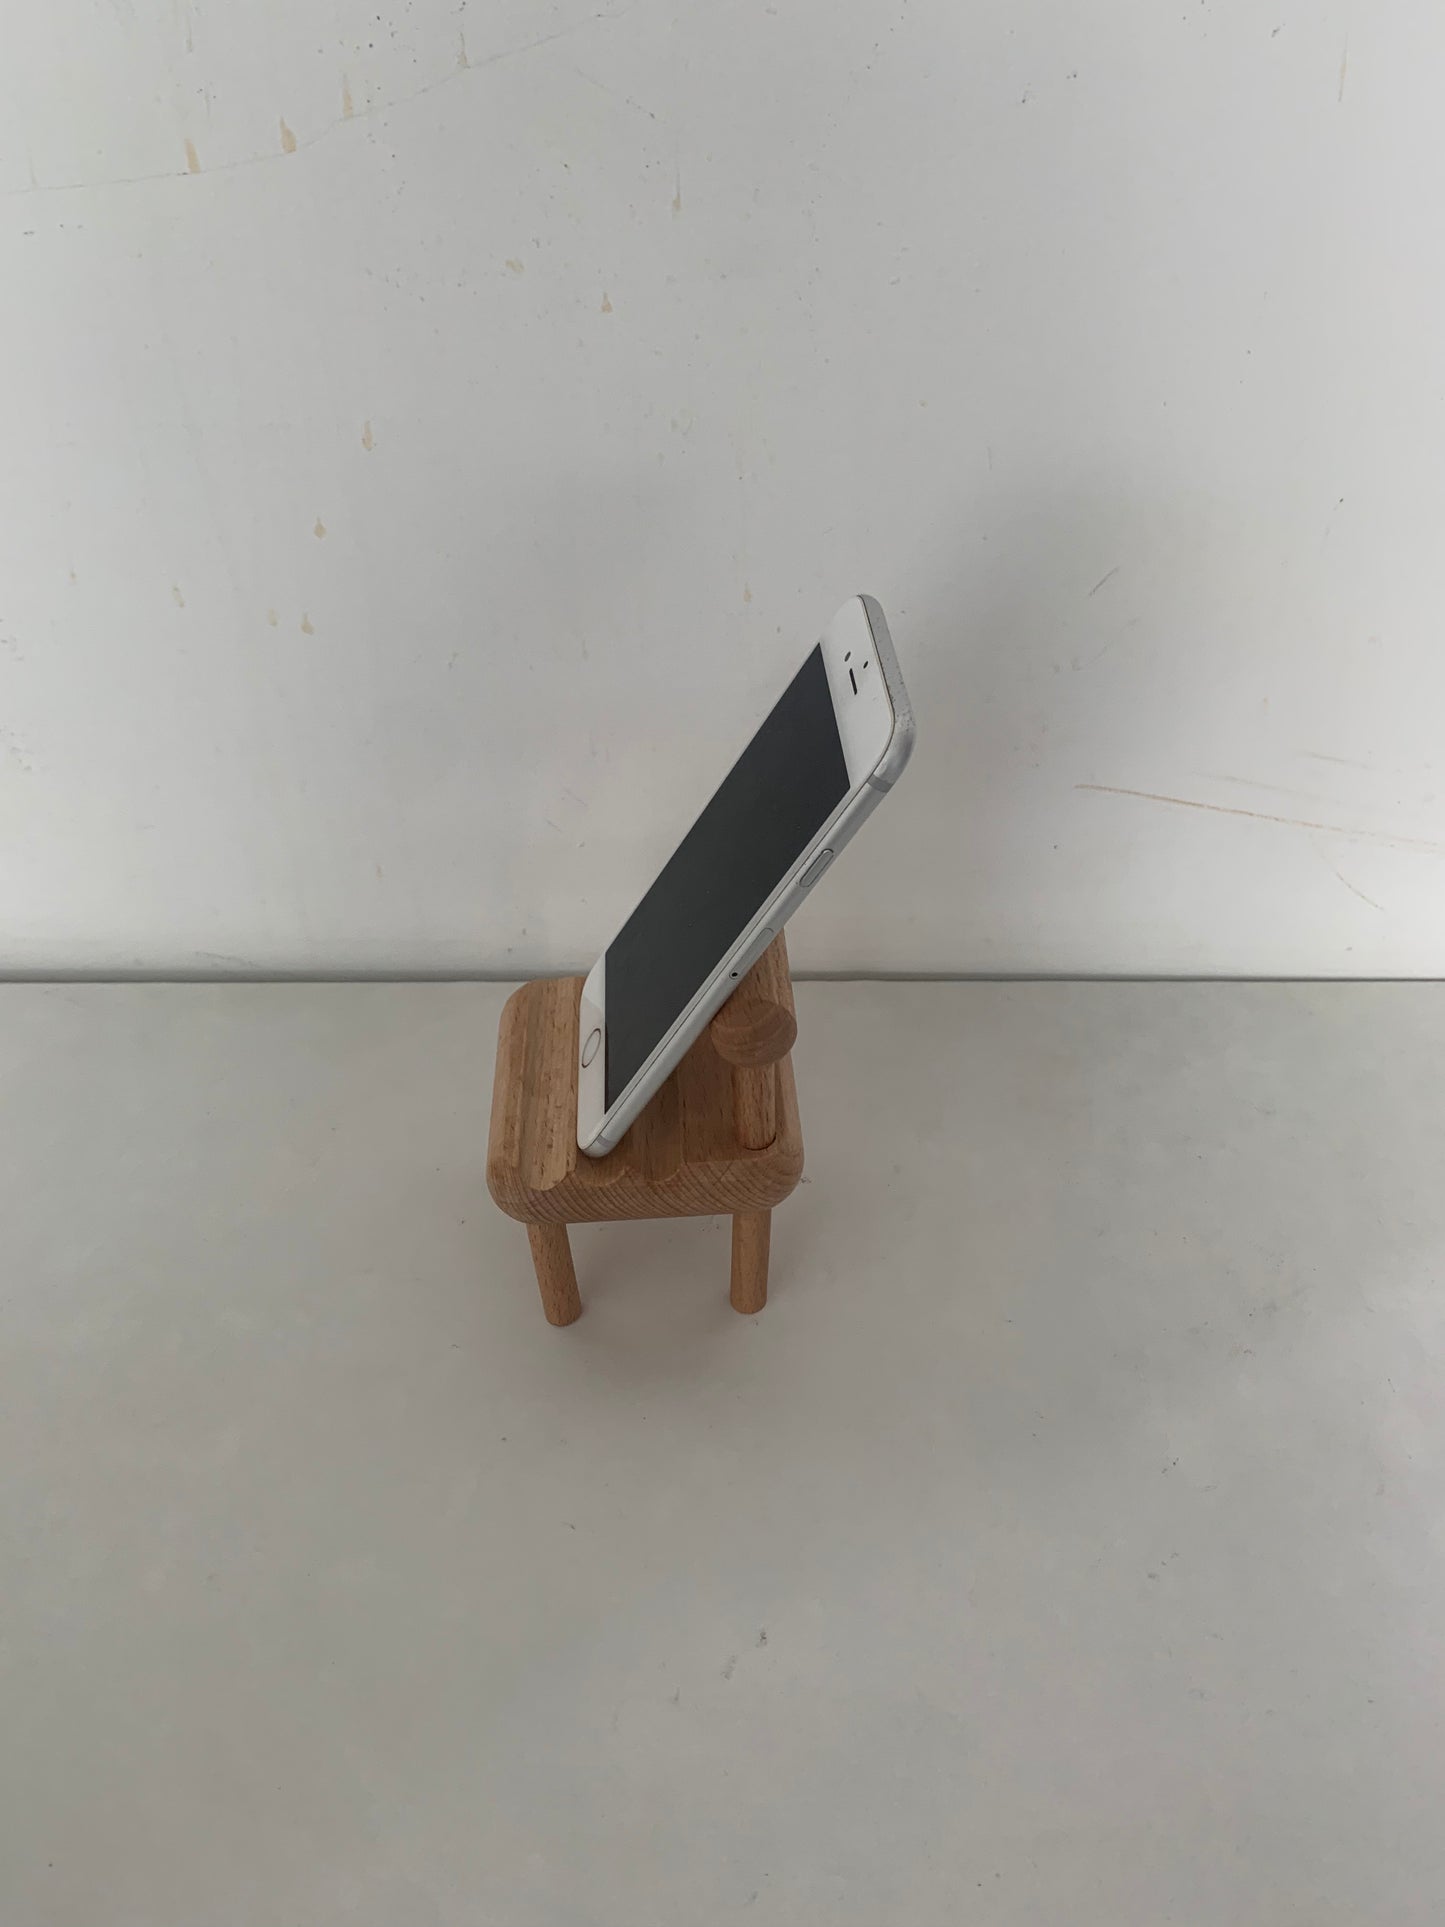 Newentor Life Stands adapted for mobile phones